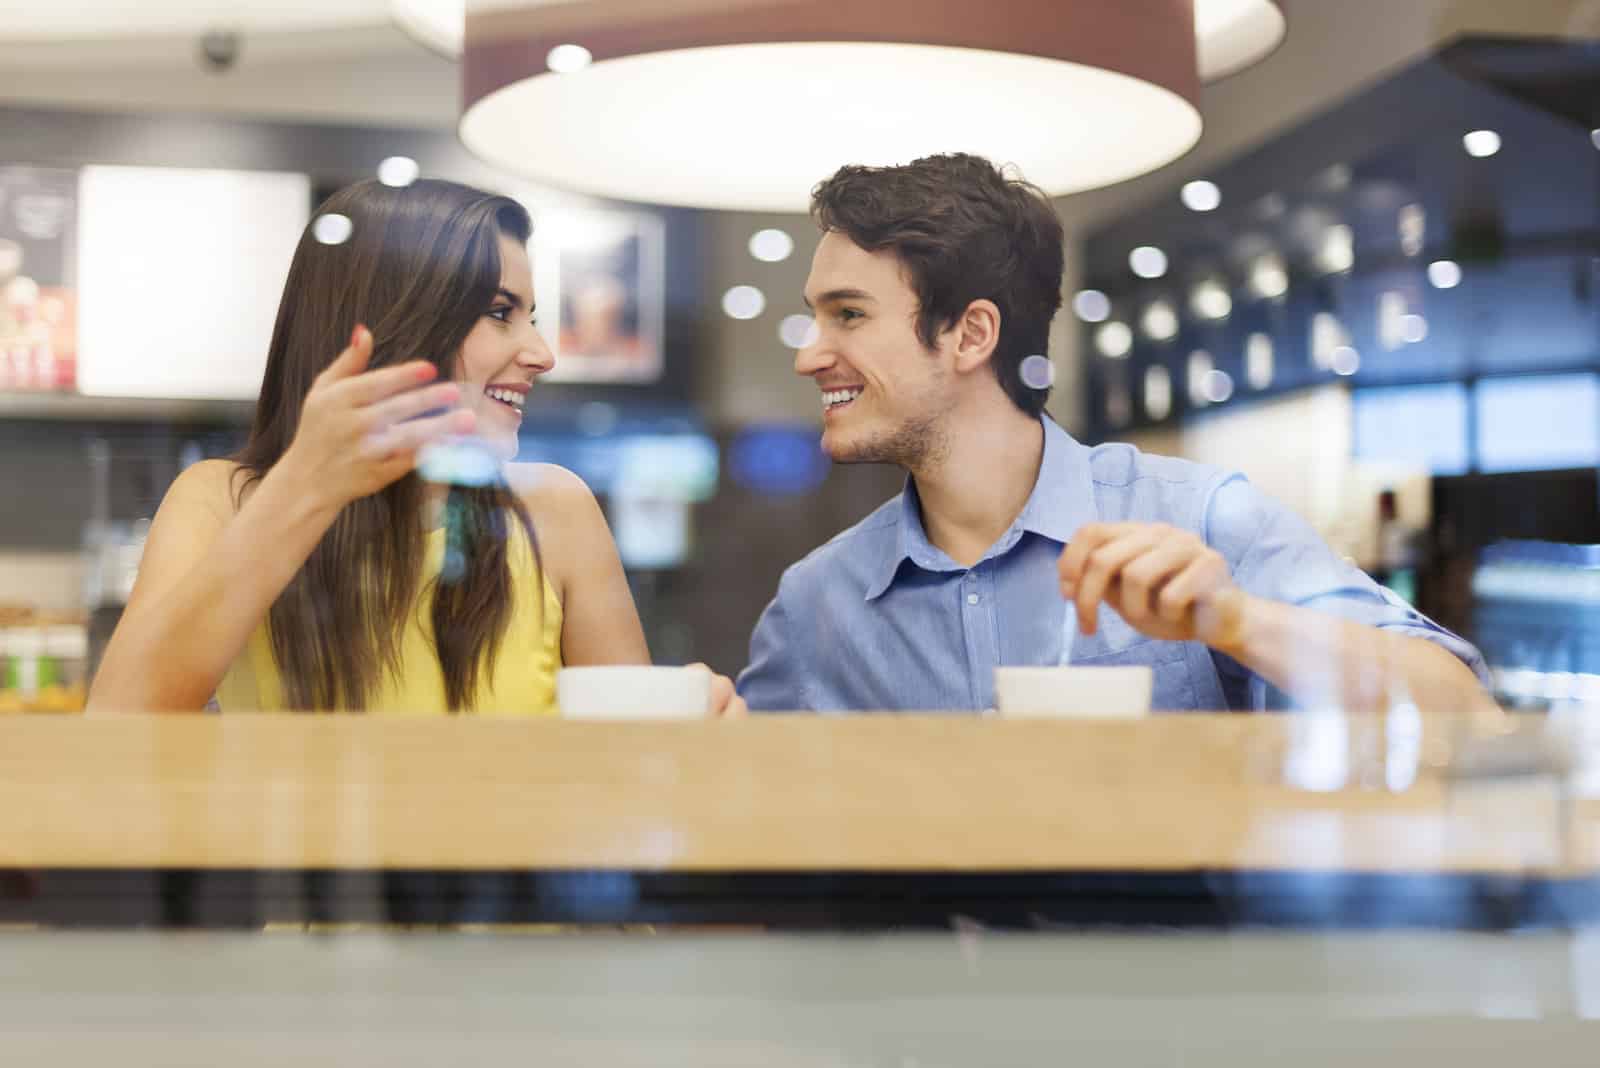 a smiling man and woman sit drinking coffee and talking